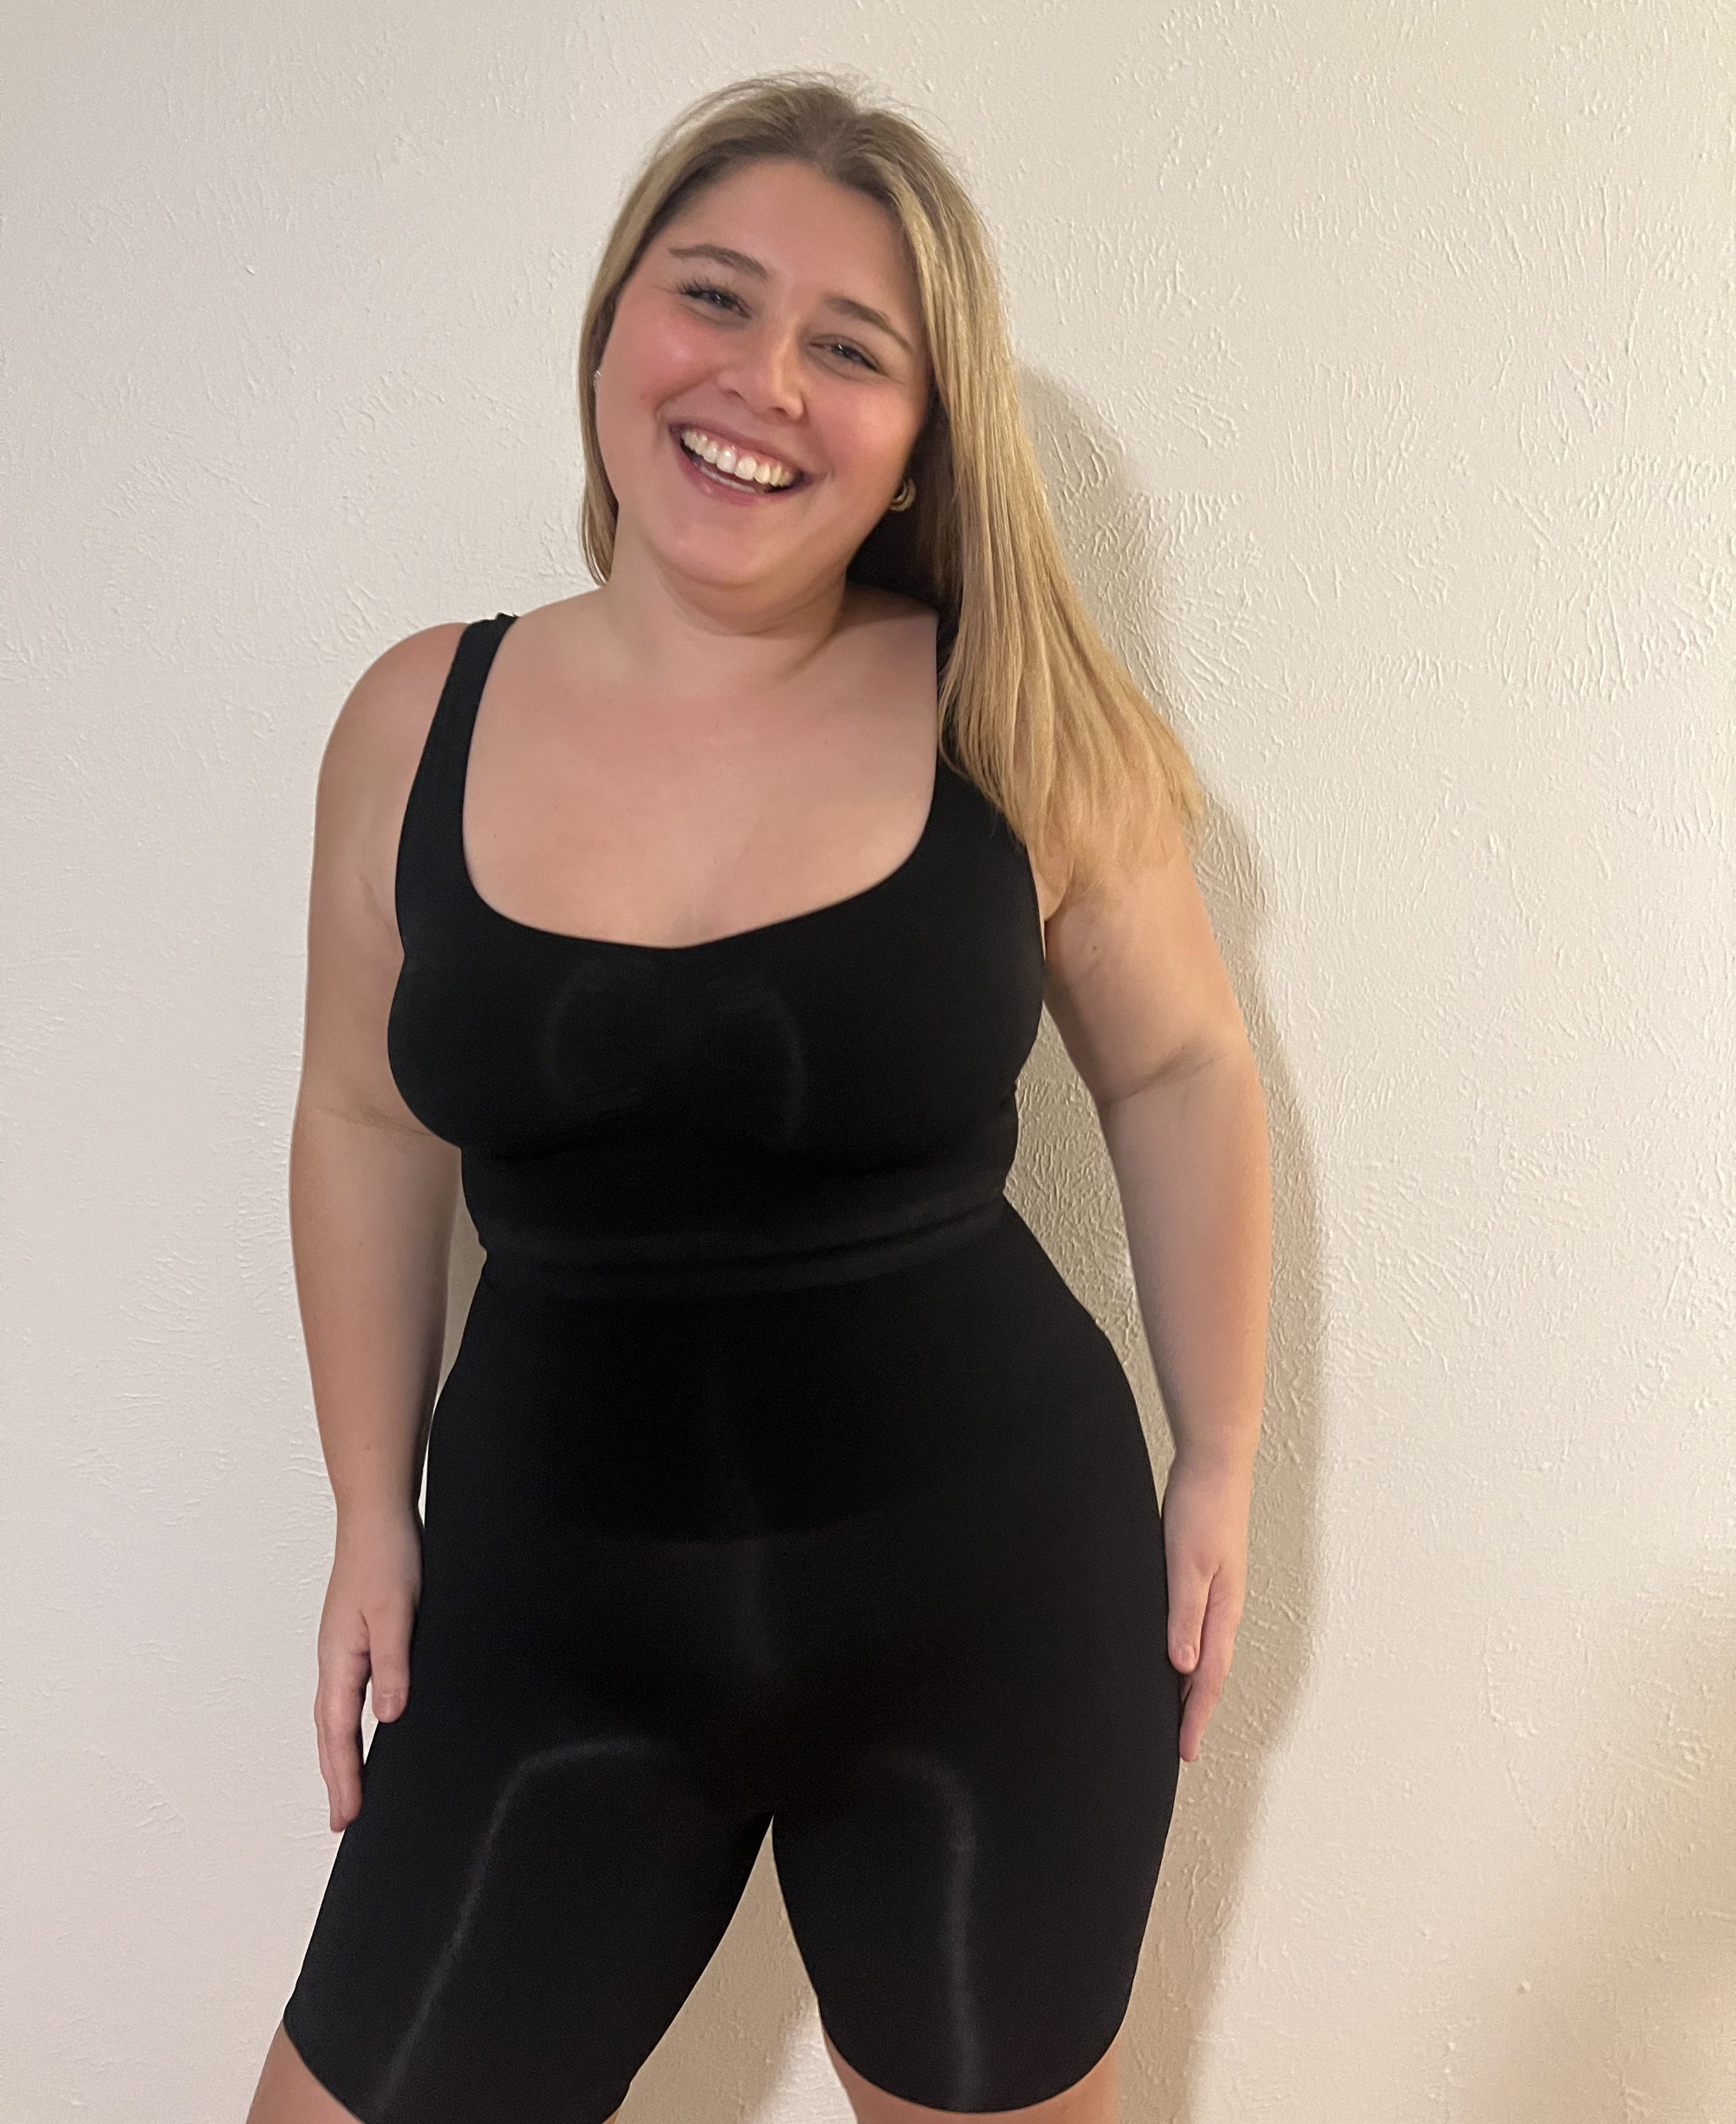 Shapewear is a must have fashion essential that makes us feel